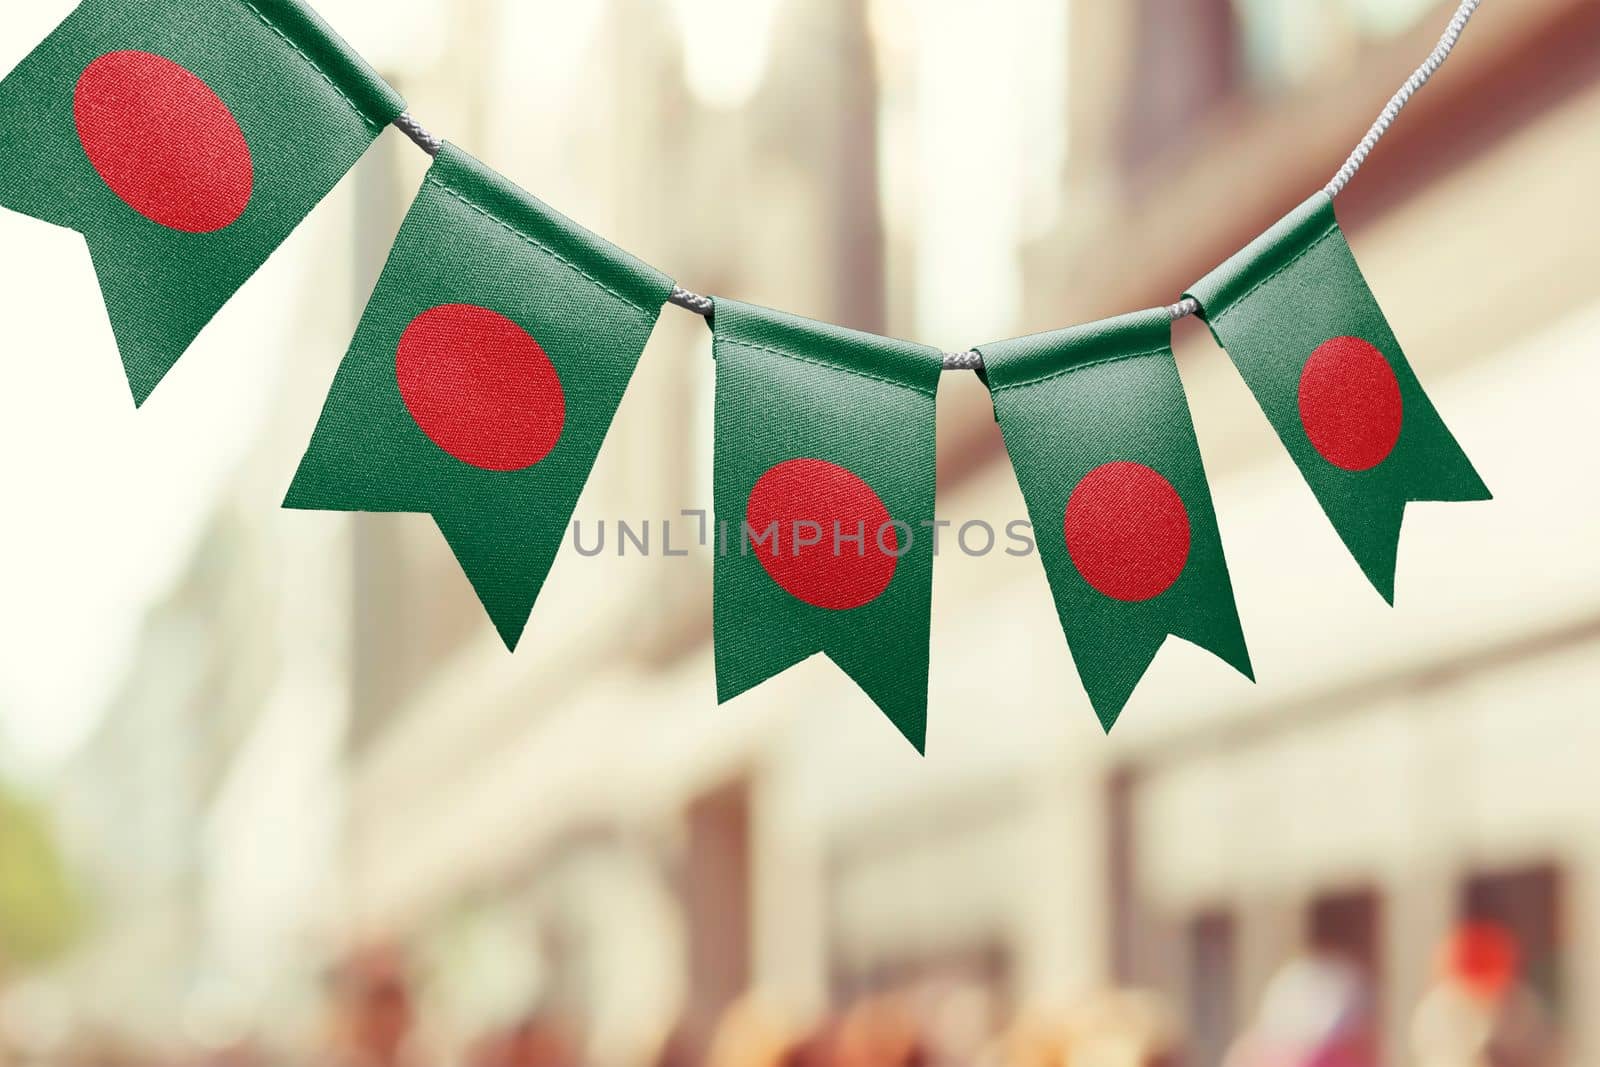 A garland of Bangladesh national flags on an abstract blurred background.